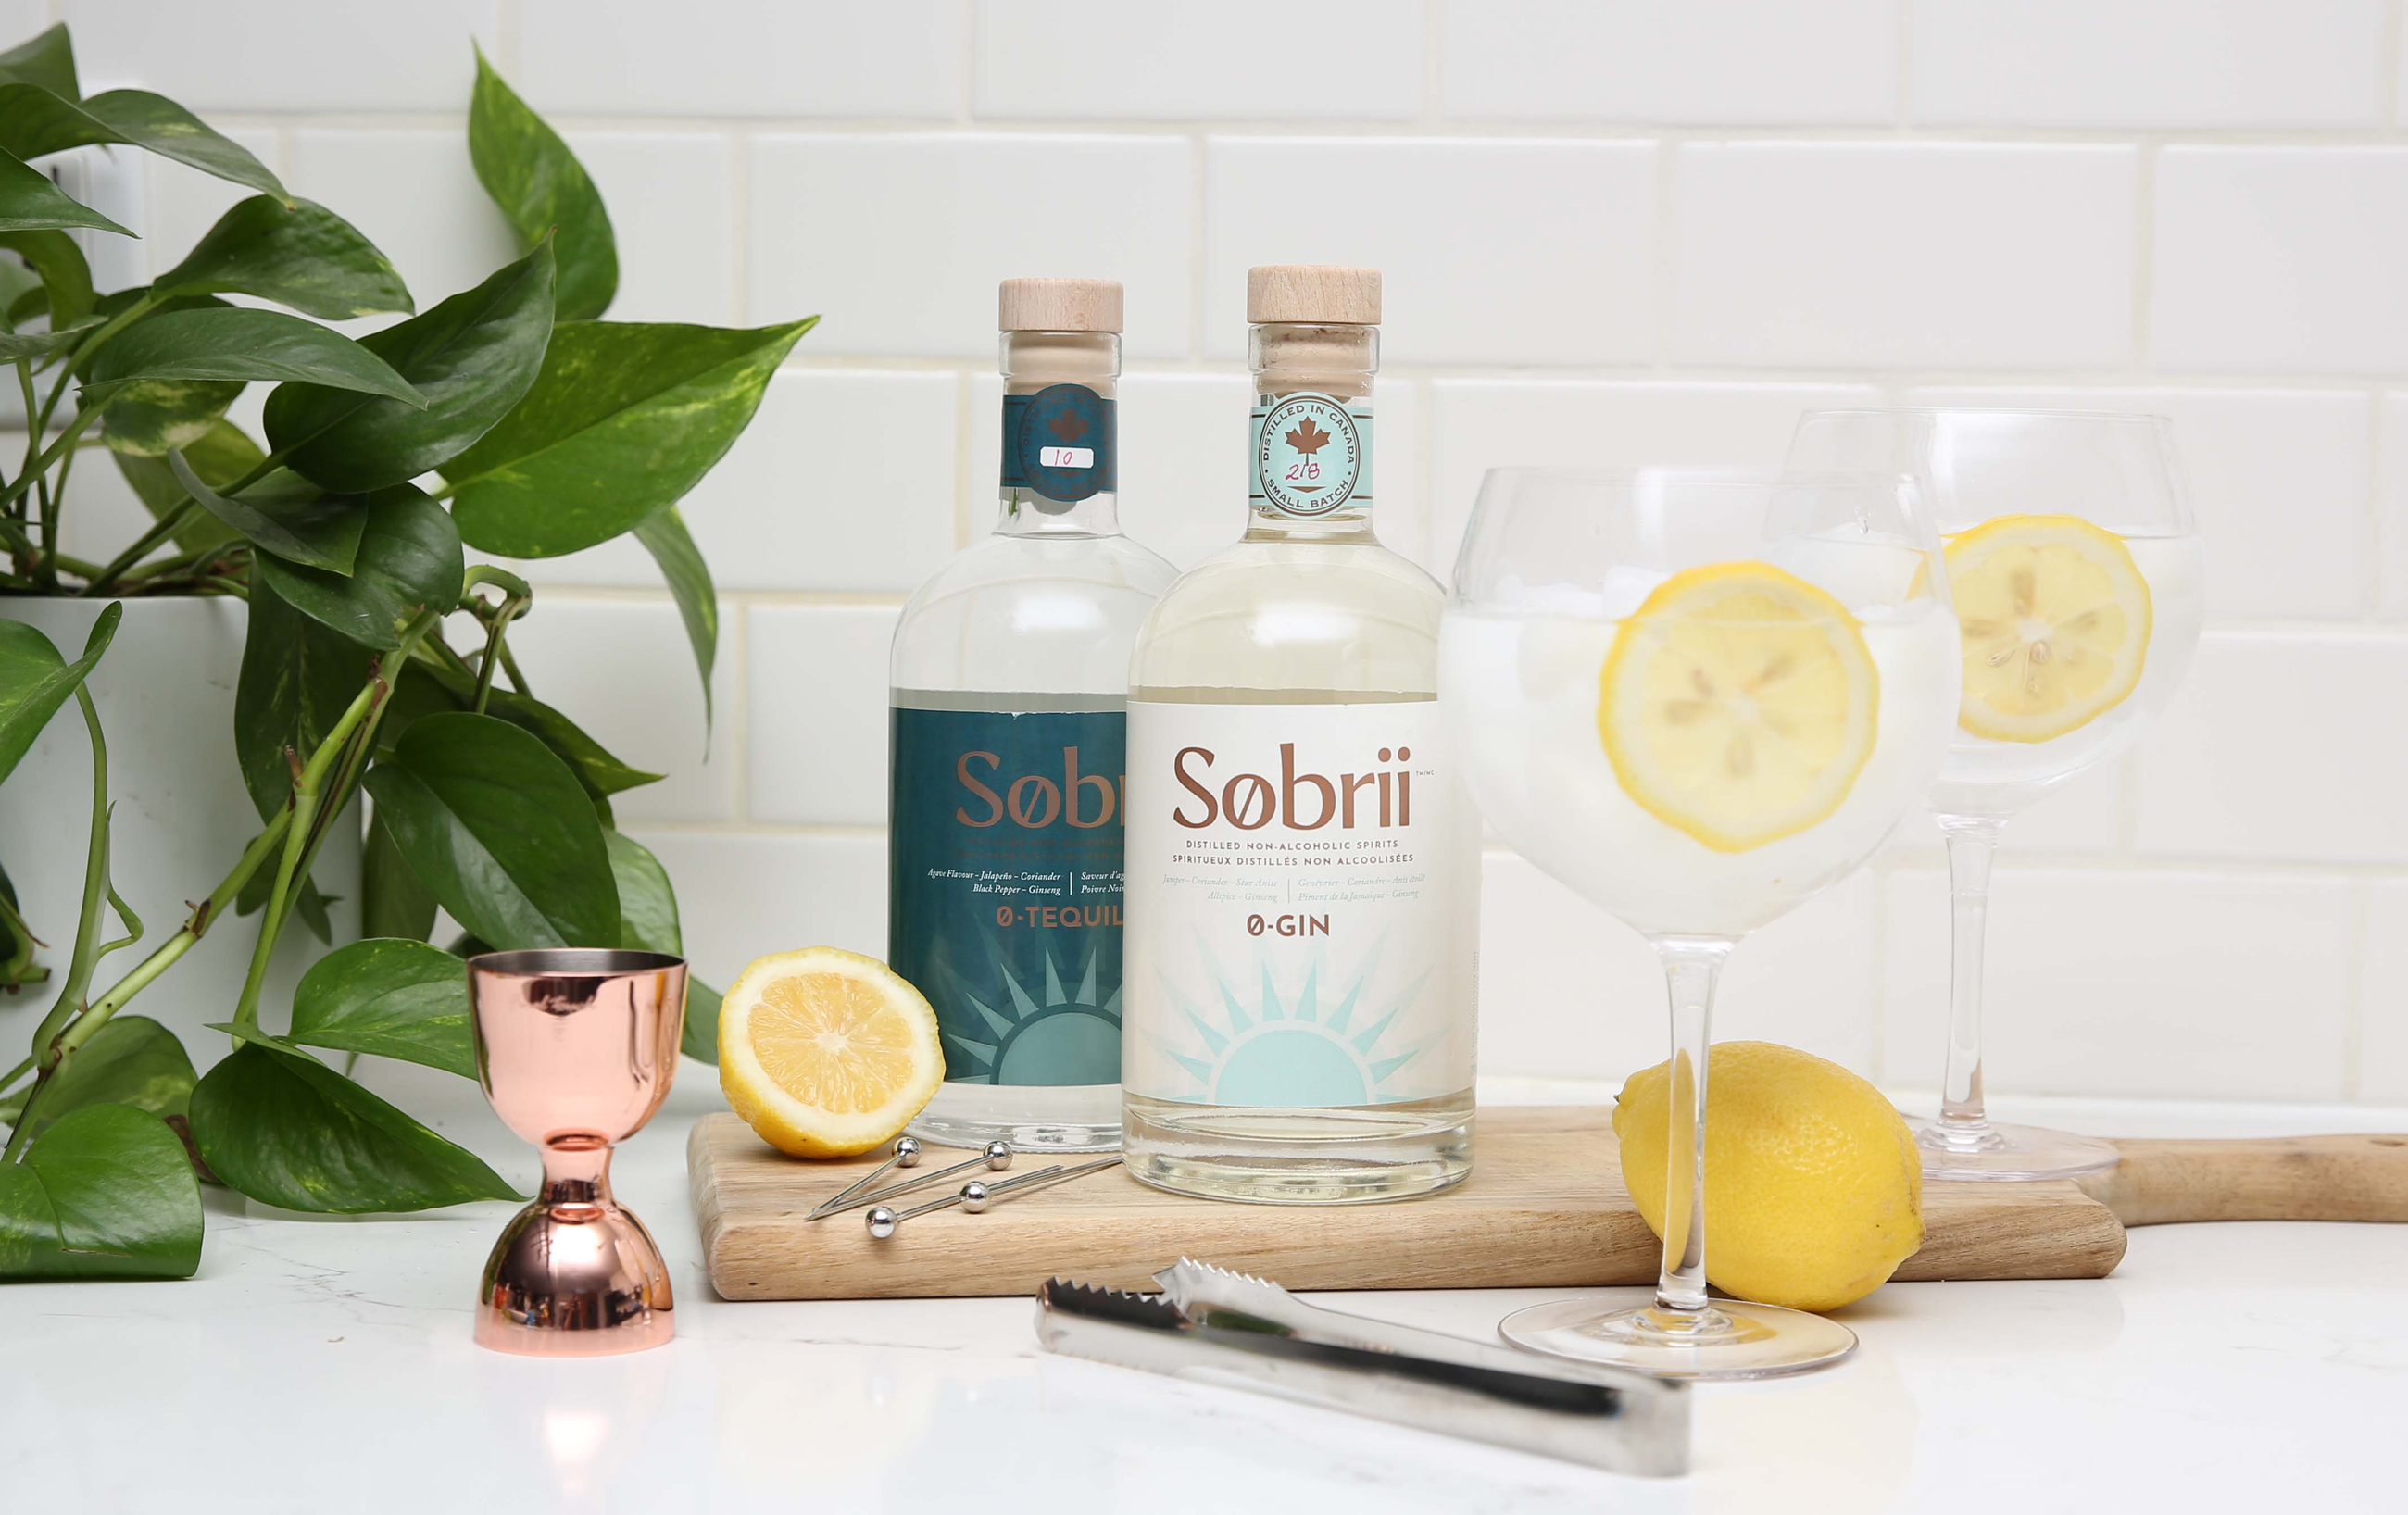 Sobrii non-alcoholic spirits bottles next to cocktails and lemons